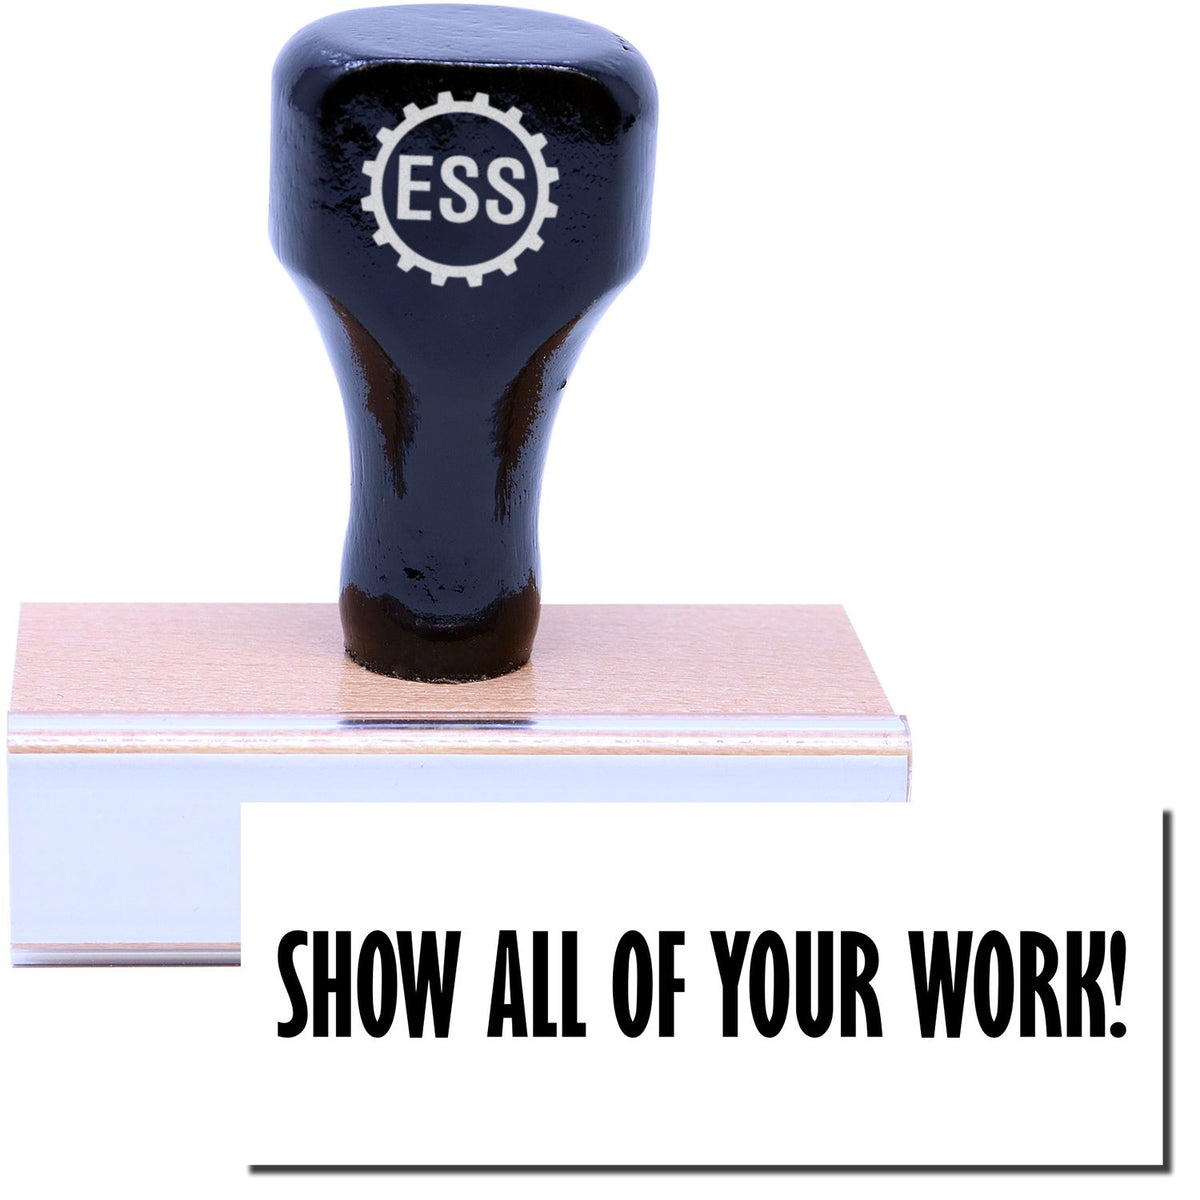 A stock office rubber stamp with a stamped image showing how the text &quot;SHOW ALL OF YOUR WORK!&quot; in a large font is displayed after stamping.